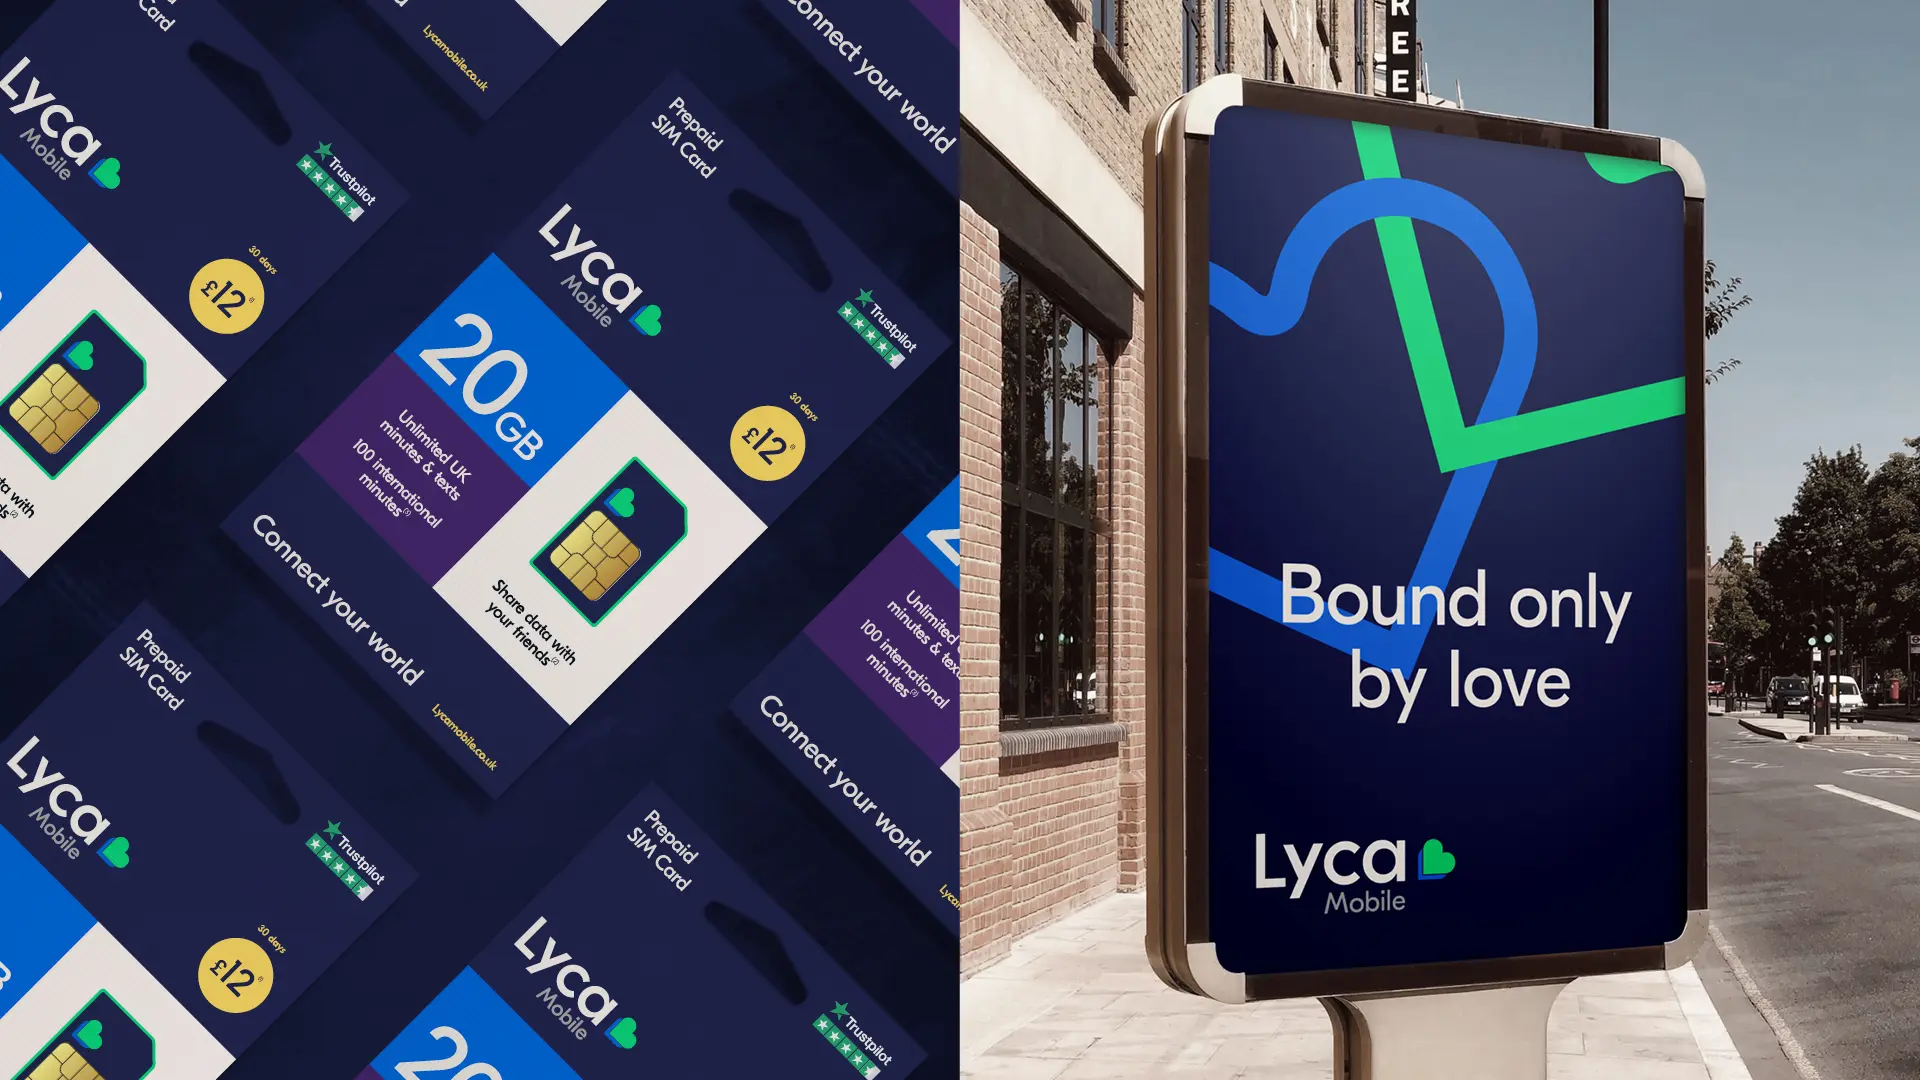 Clear reinvents Lyca Mobile brand - Clear M&C Saatchi